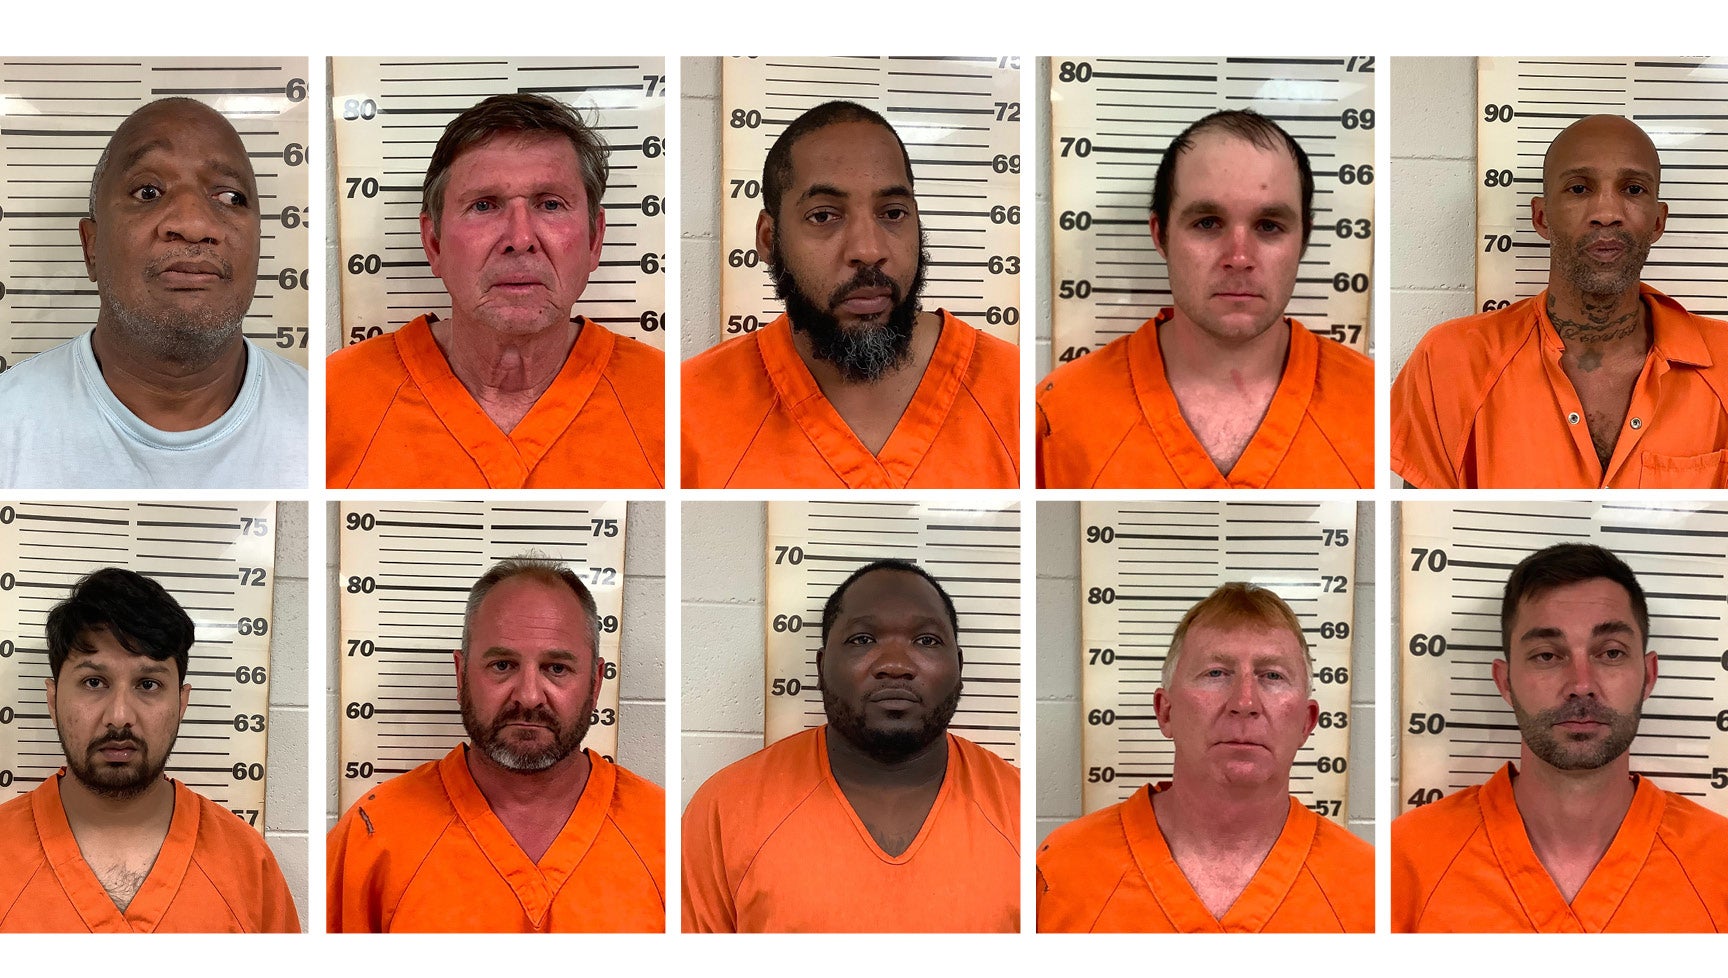 Mississippi sheriff releases photos of men arrested in prostitution